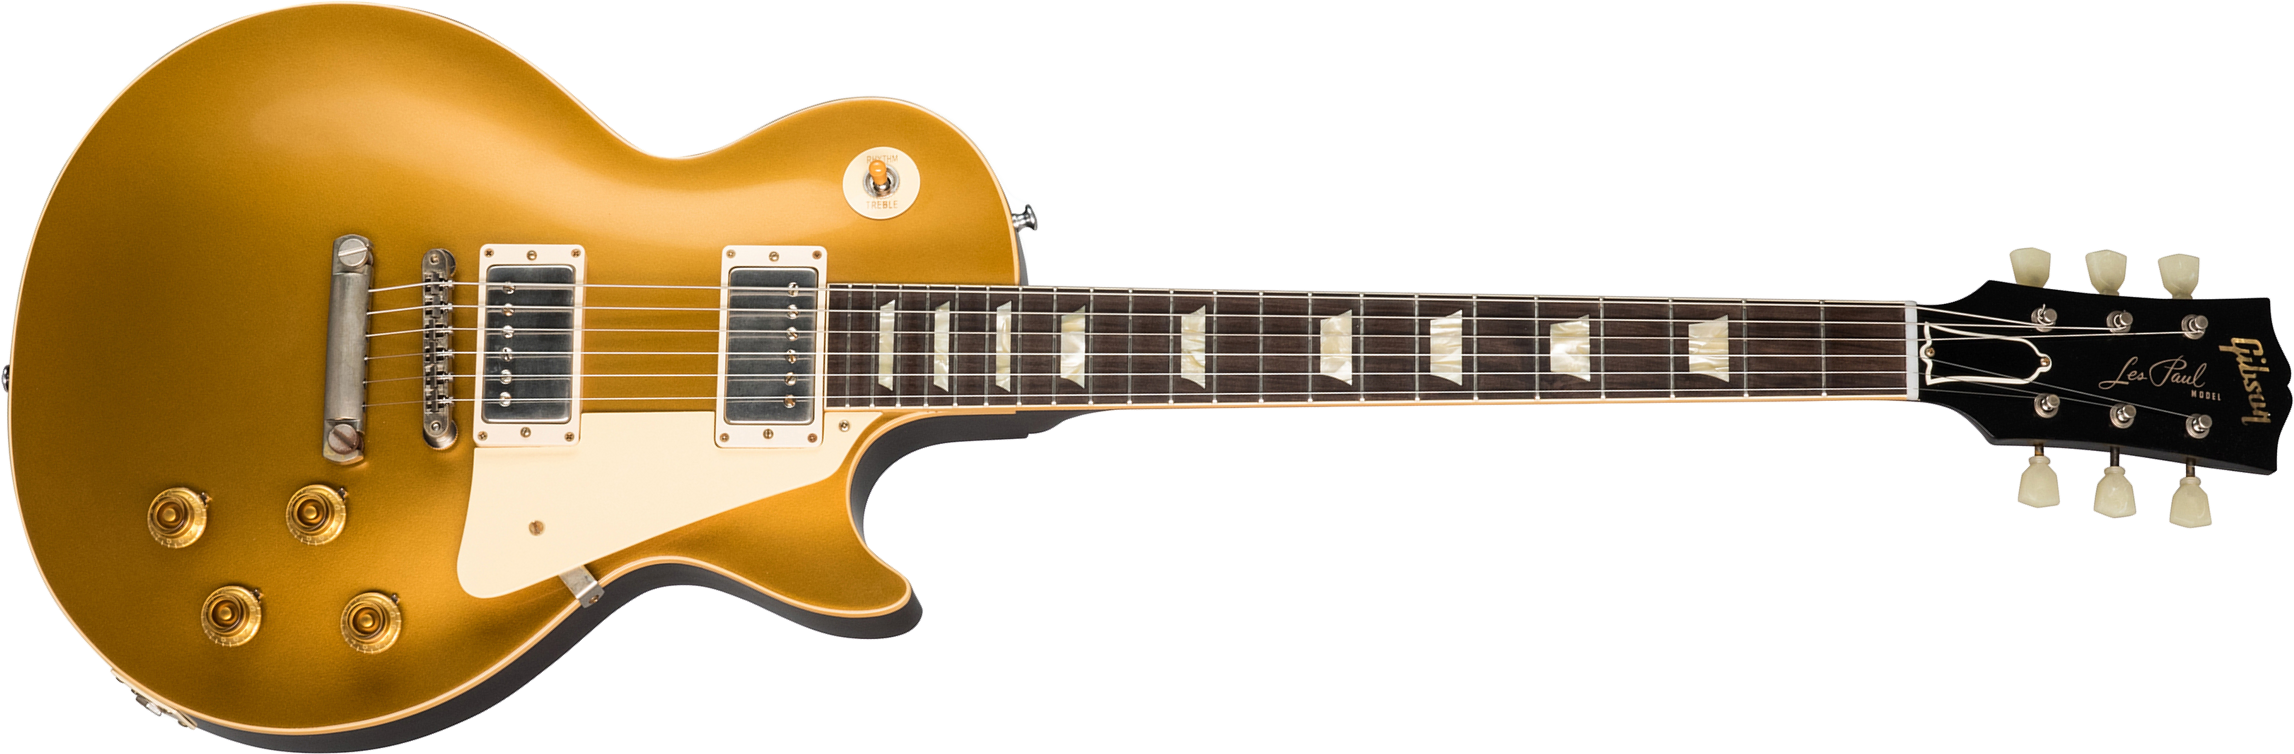 Gibson Custom Shop Les Paul Goldtop 1957 Reissue 2019 2h Ht Rw - Vos Double Gold With Dark Back - Single-Cut-E-Gitarre - Main picture